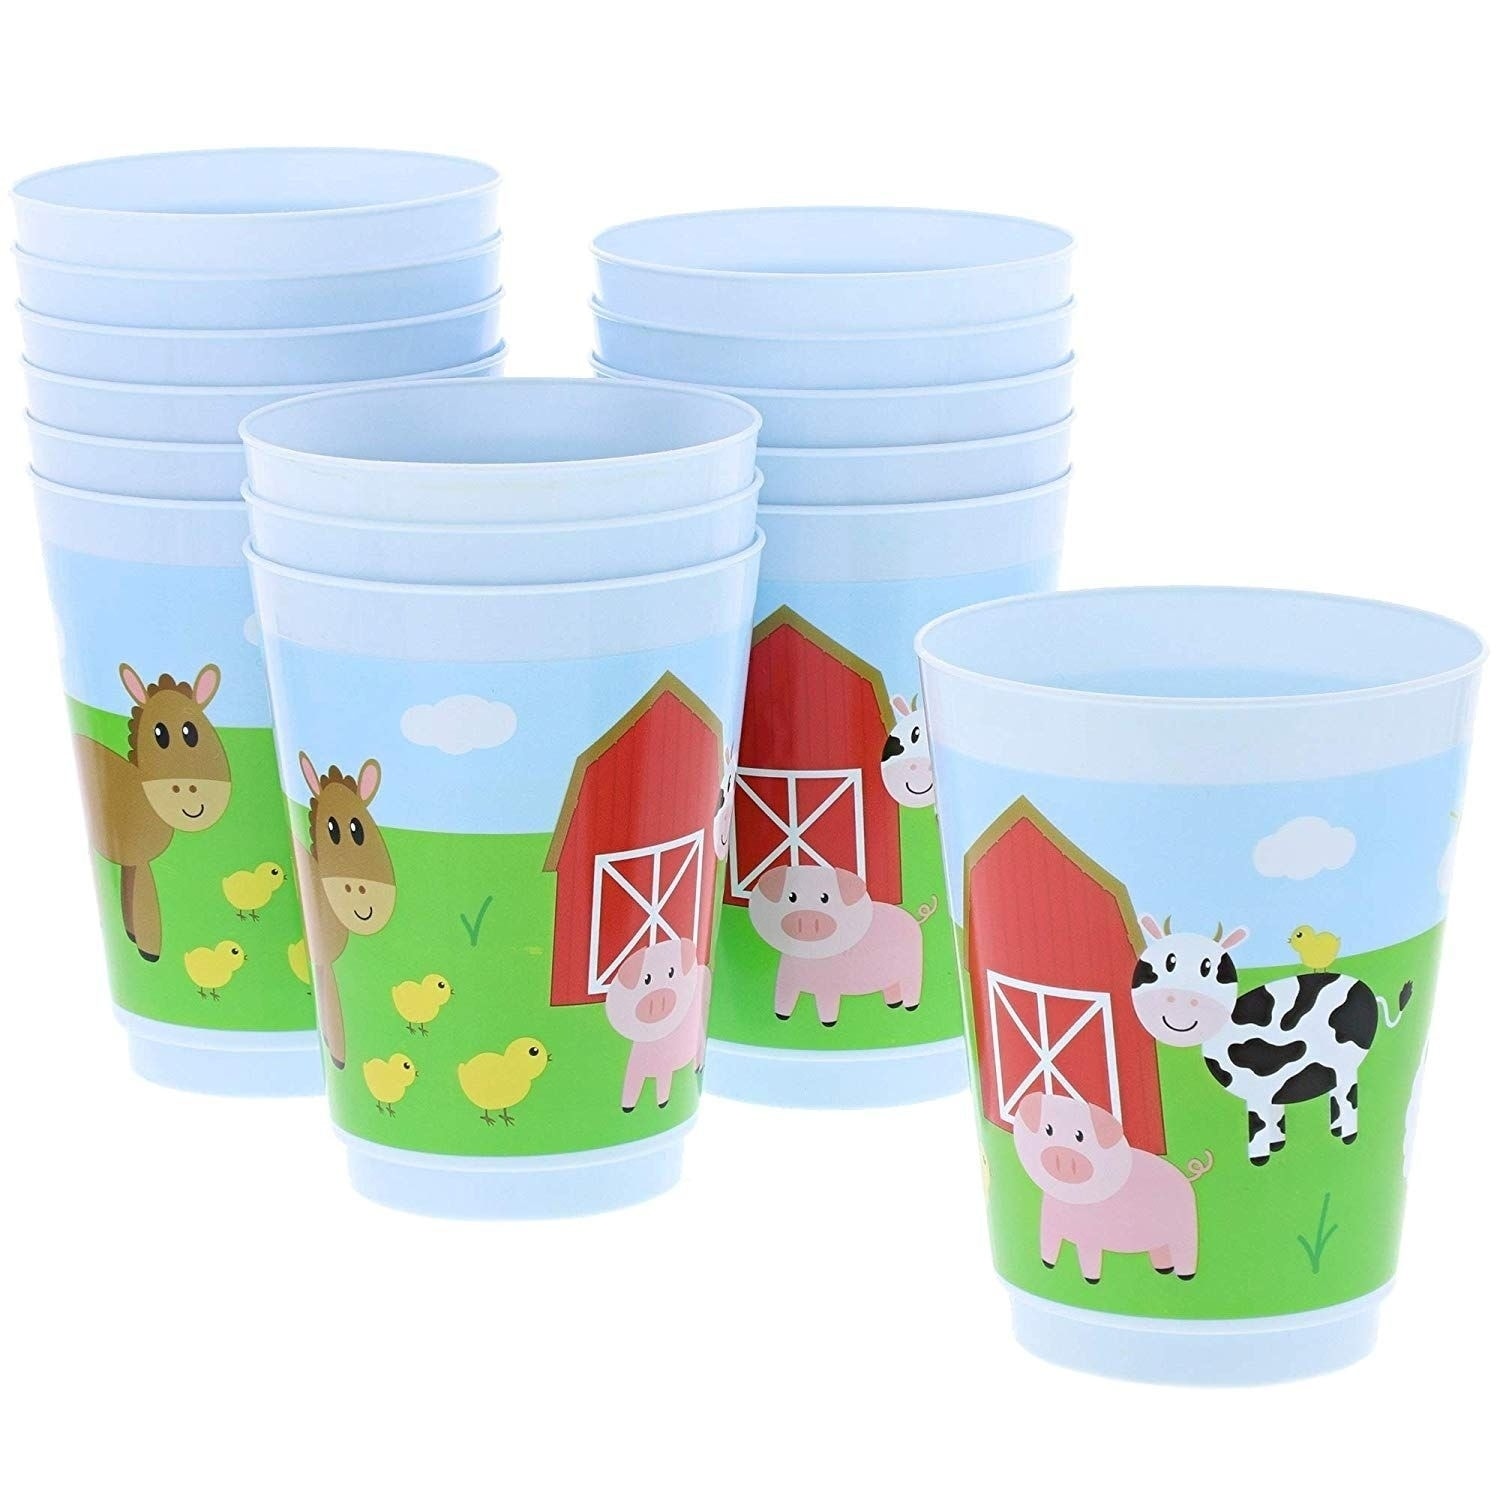 6pc Colourful Plastic Cups Reusable Eco-Friendly Drinking Cup